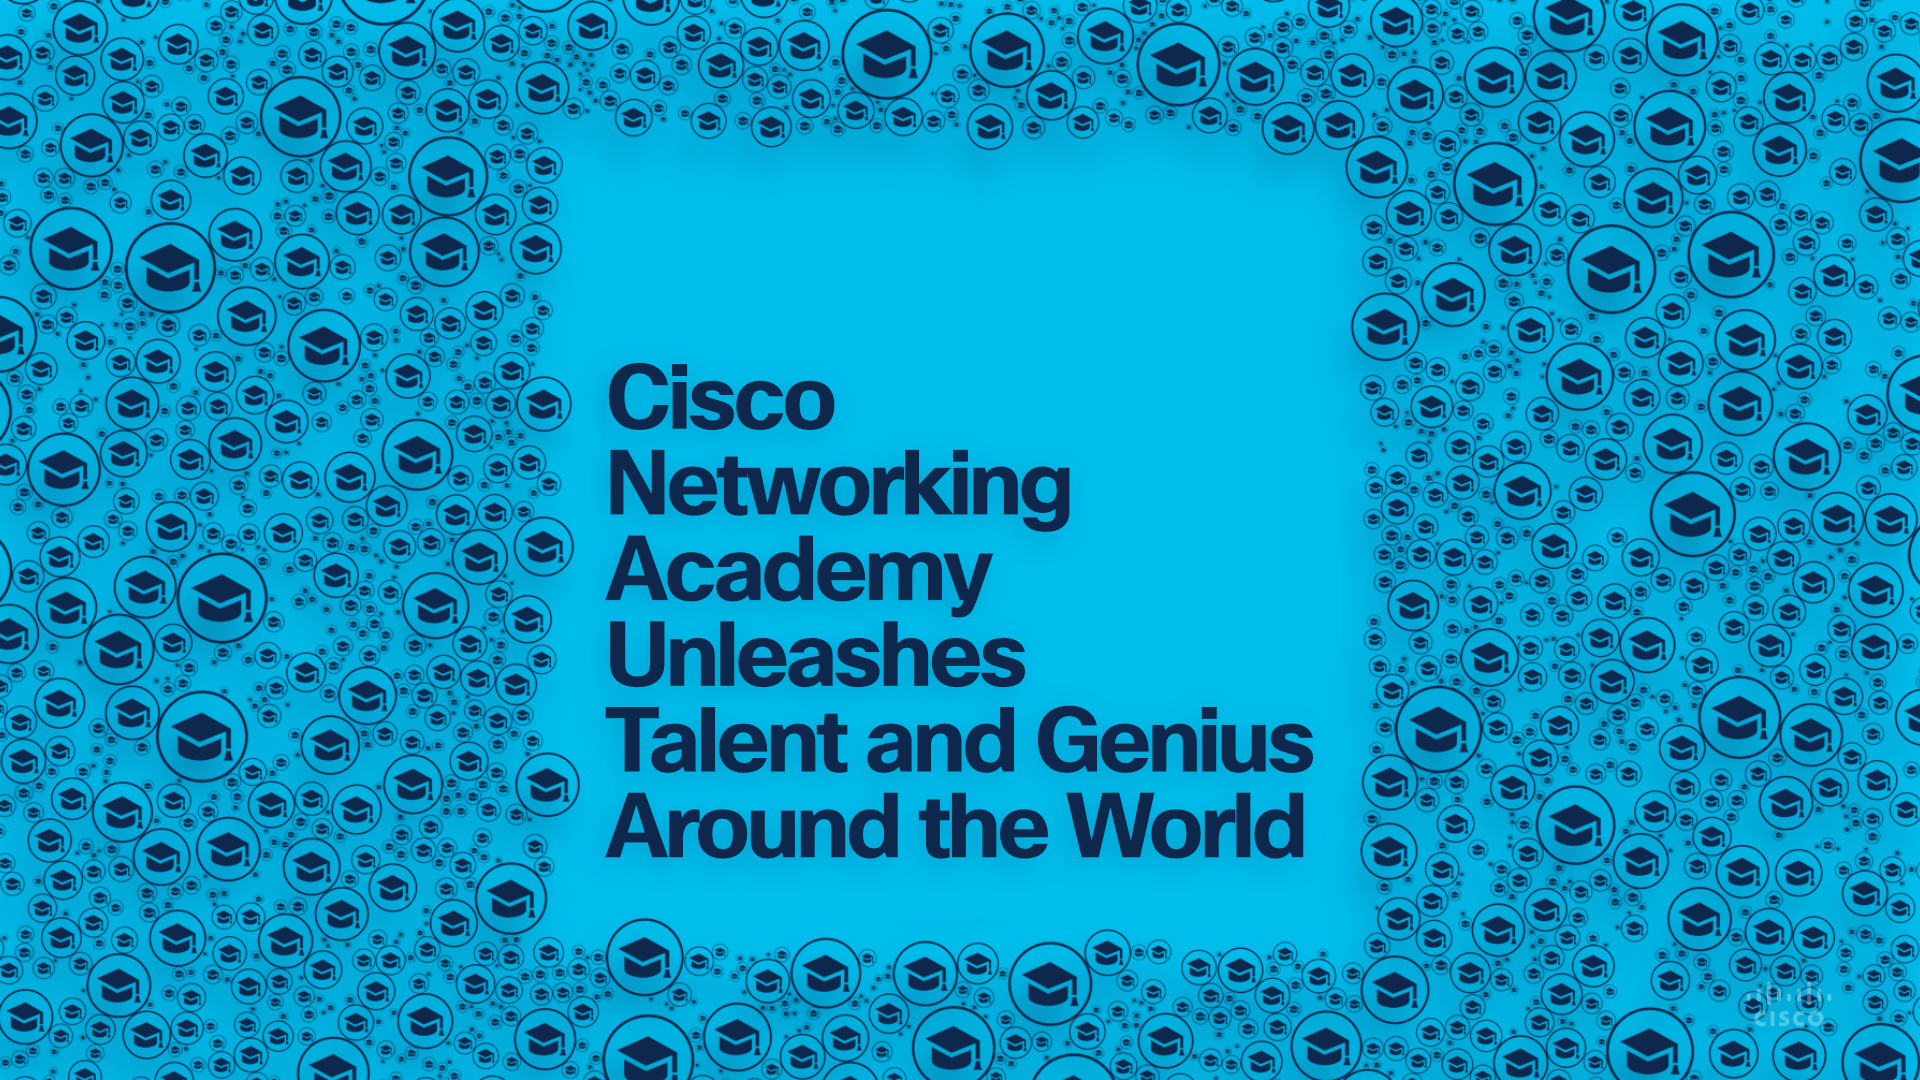 Cisco Networking Academy unleashes talent and genius around the world